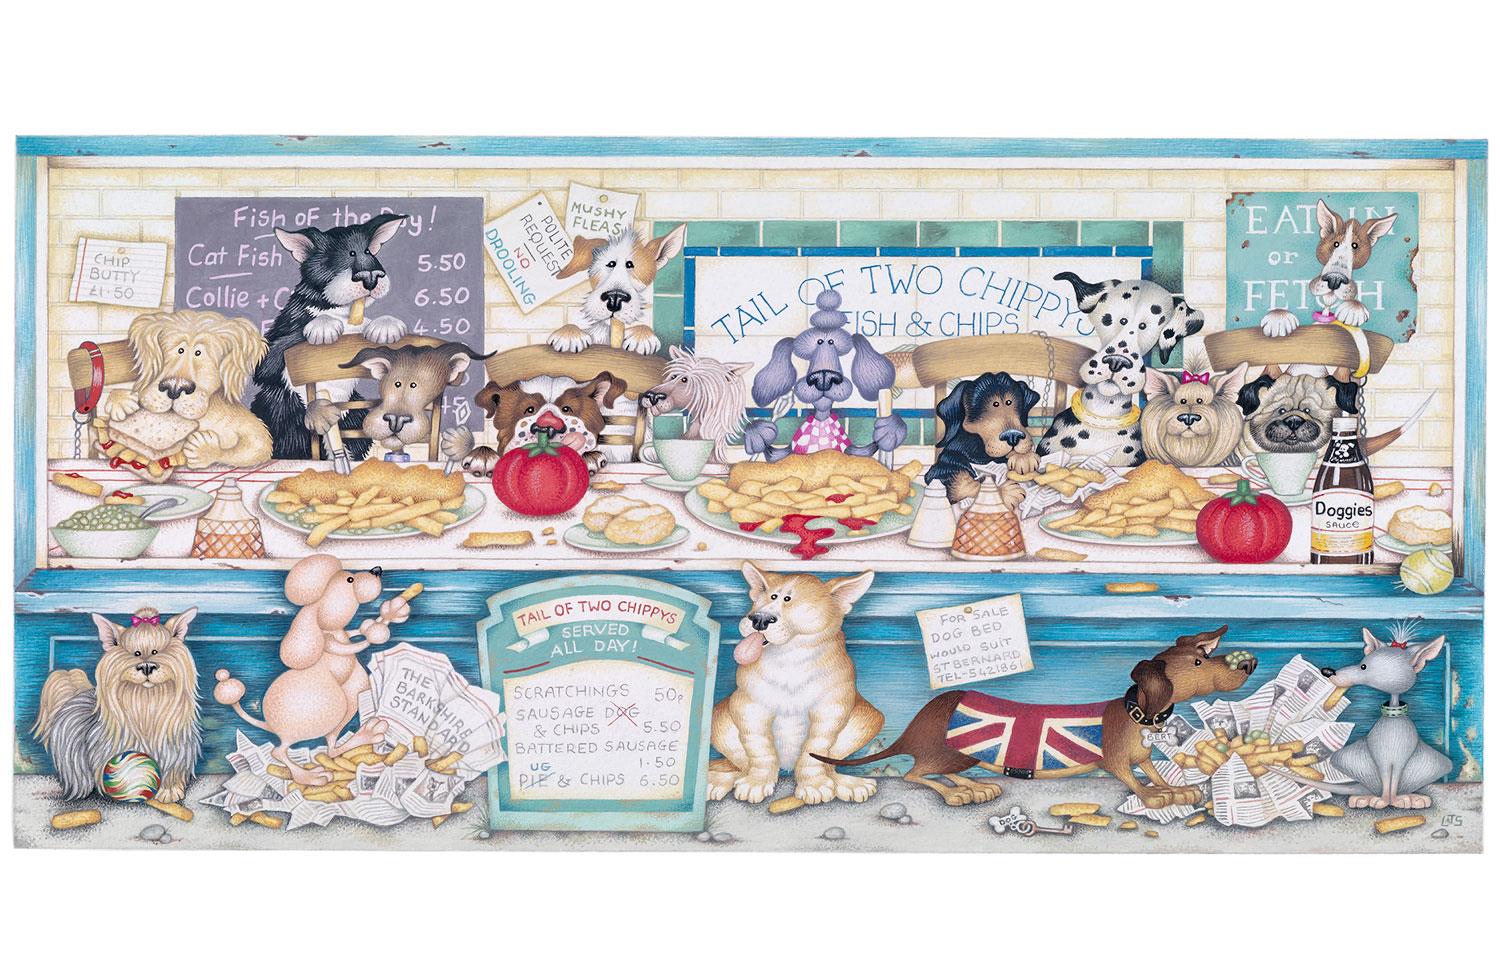 Gibsons Tail of Two Chippys Jigsaw Puzzle Jigsaw Puzzle (636 Pieces)